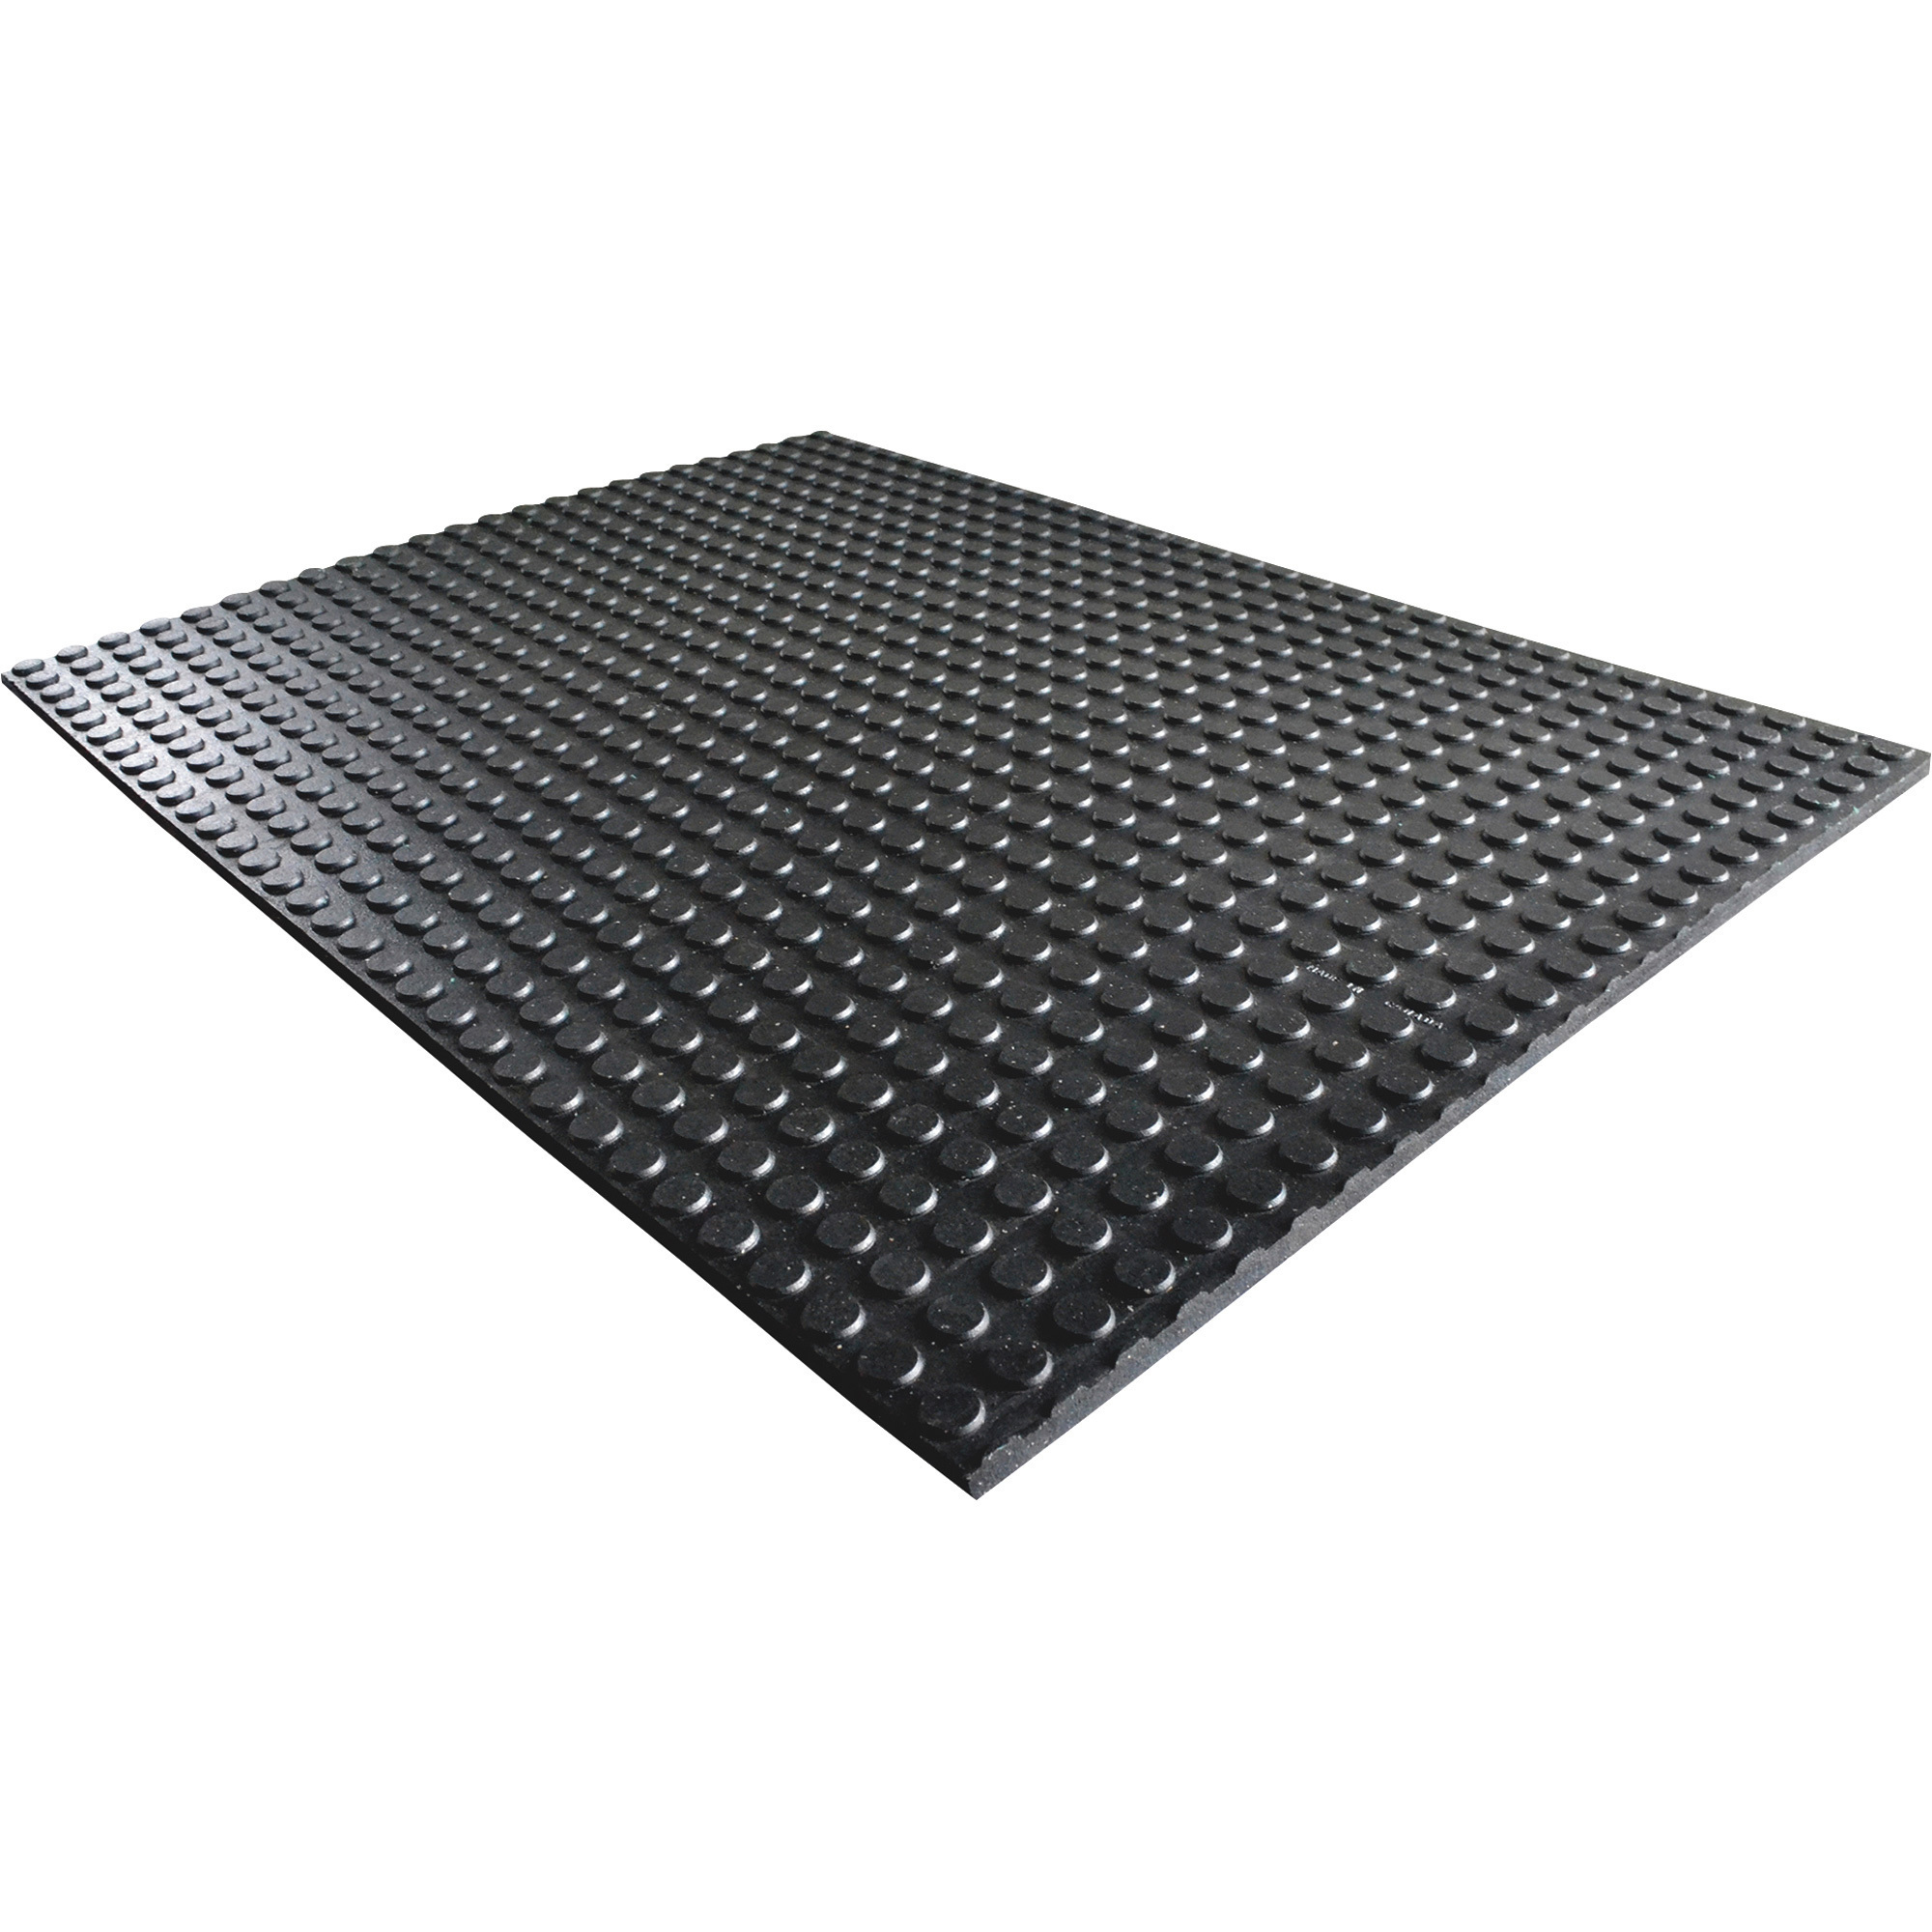 Red Barn Button/Flat Dual Surface Anti-Fatigue Mat, 3ft. x 4ft. x 3/4Inch, Model 1202210